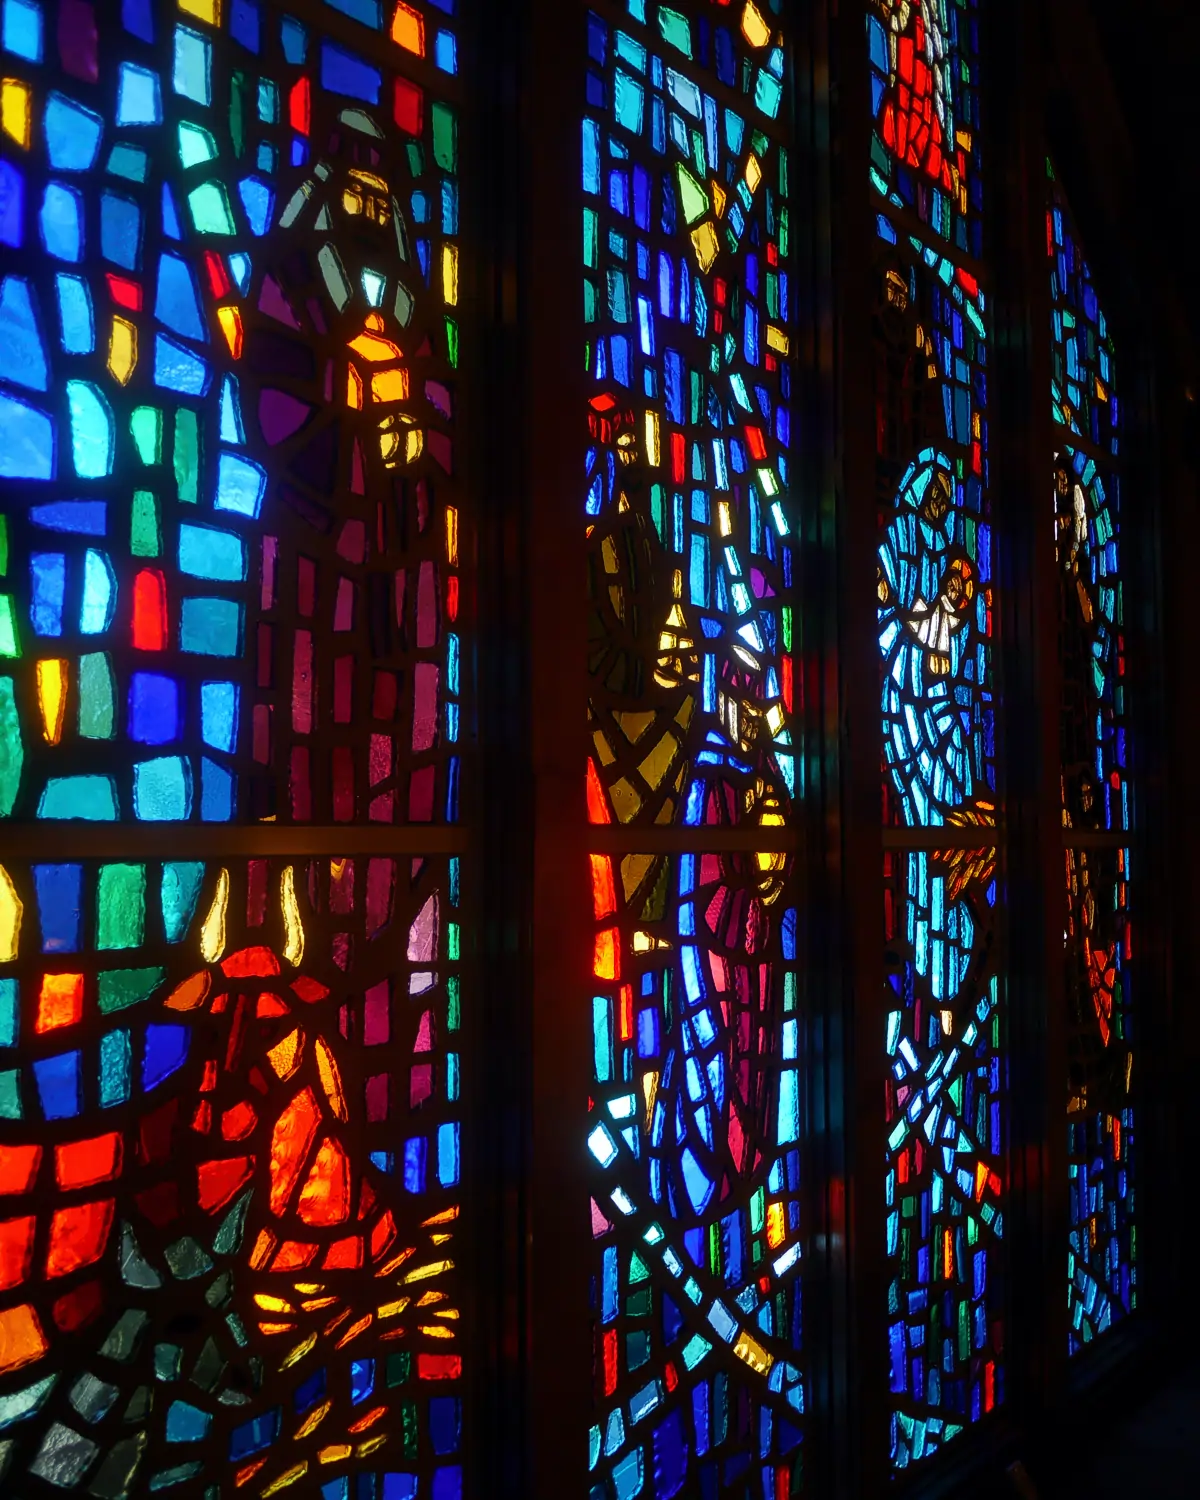 Stained Glass Wall, as seen from the loft